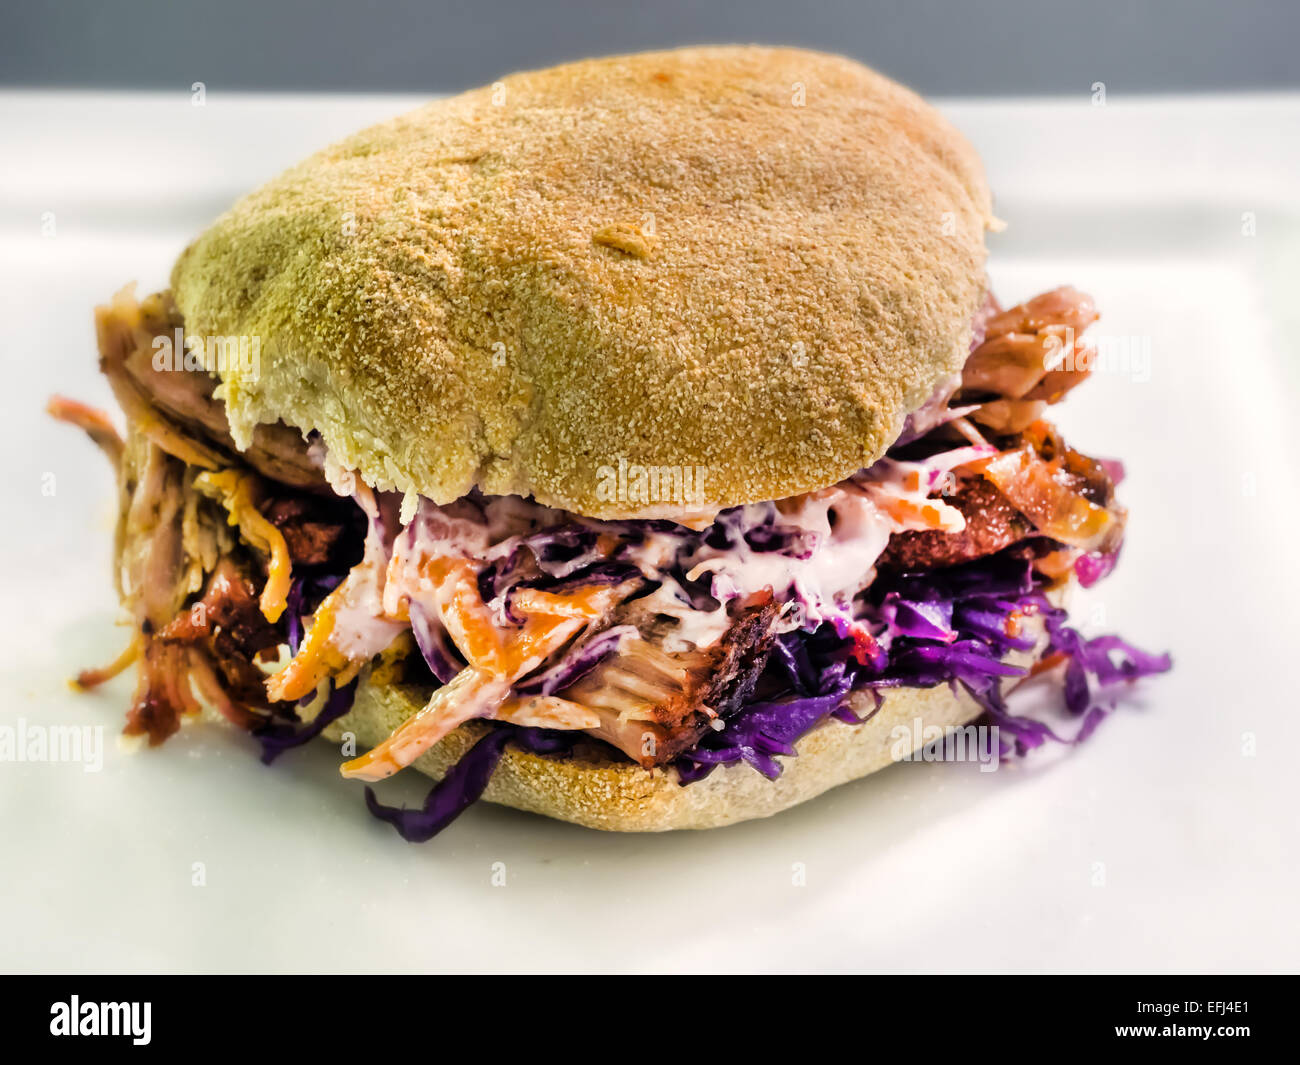 Pulled pork sandwich with coleslaw Stock Photo